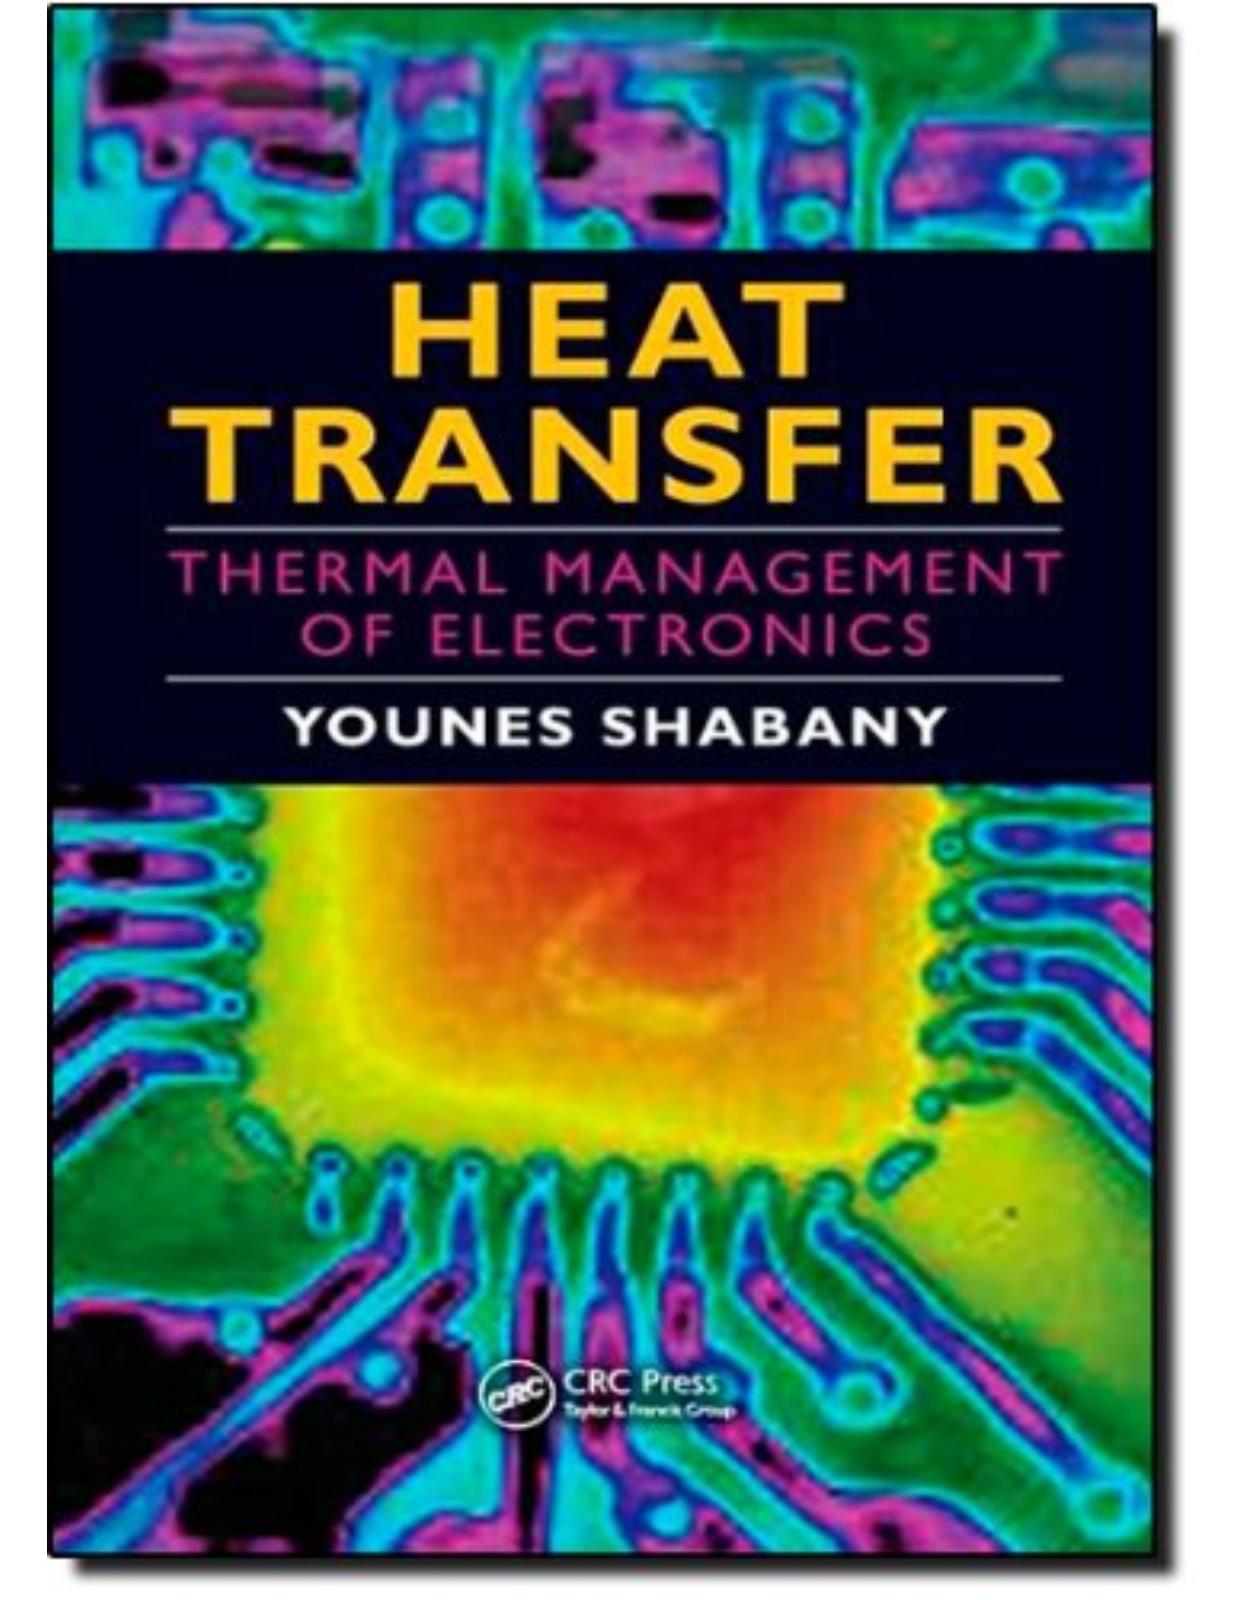 Heat Transfer: Thermal Management of Electronics